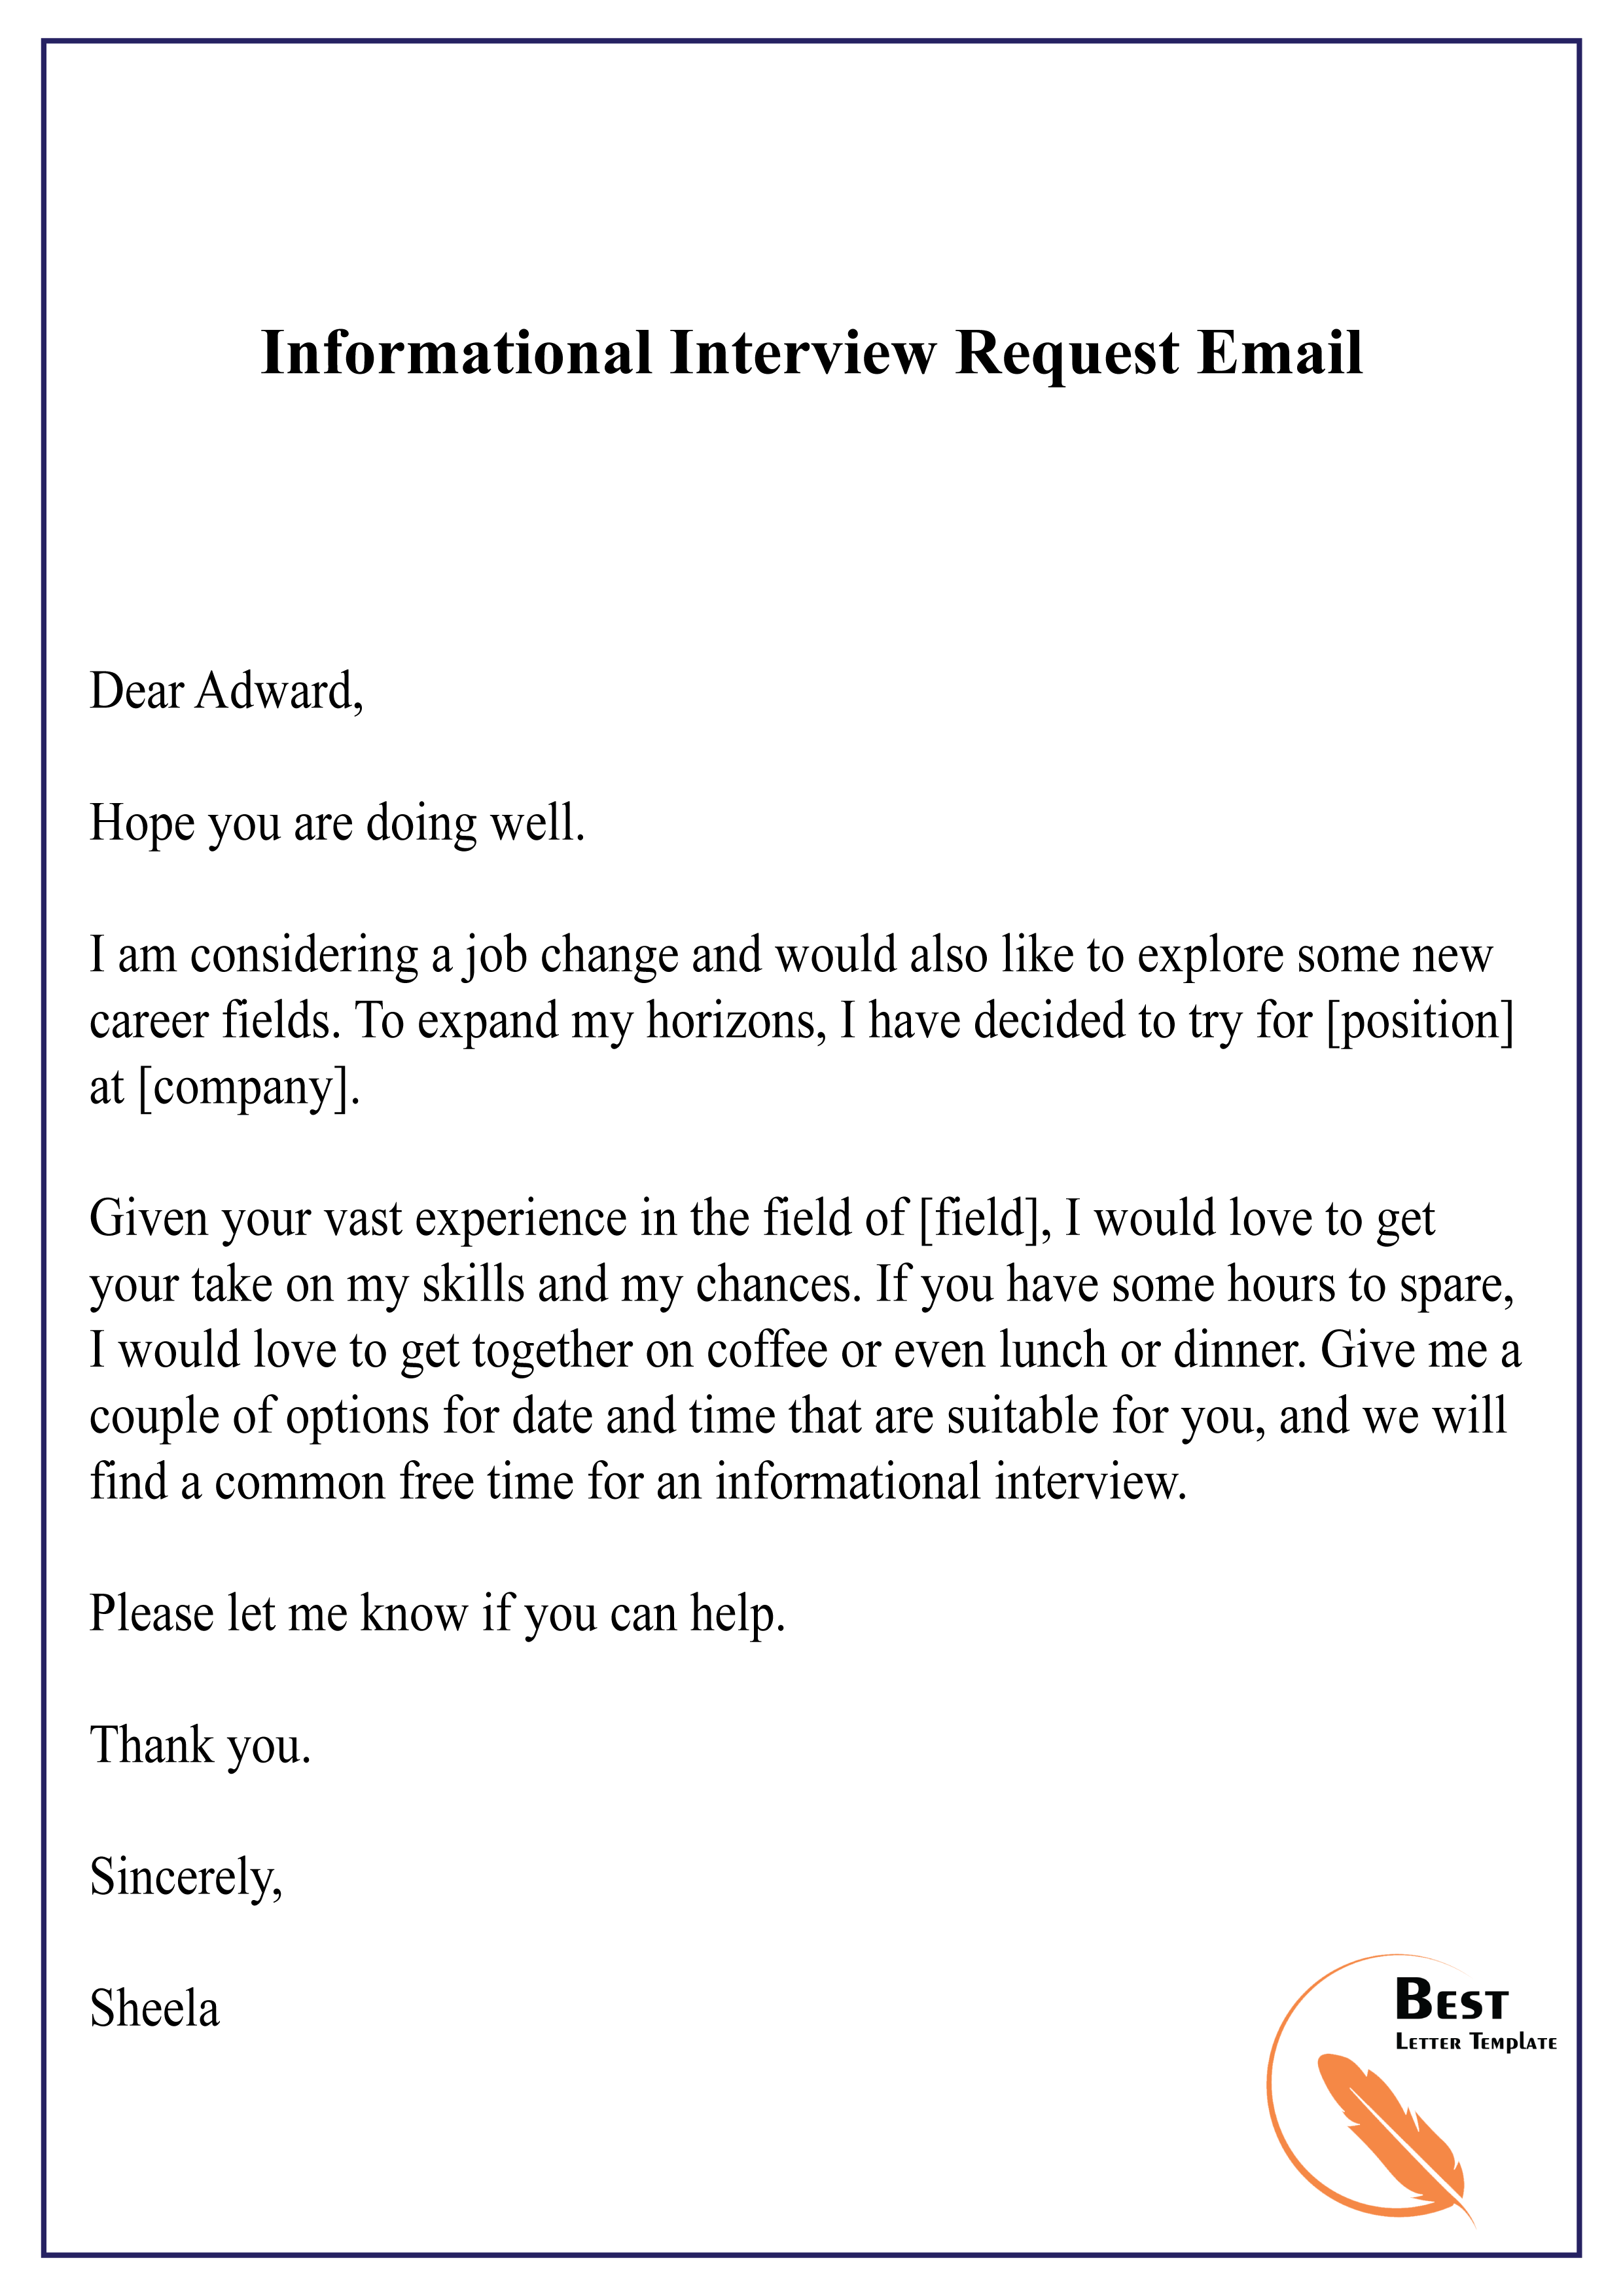 Thank You Letter For Informational Interview from bestlettertemplate.com